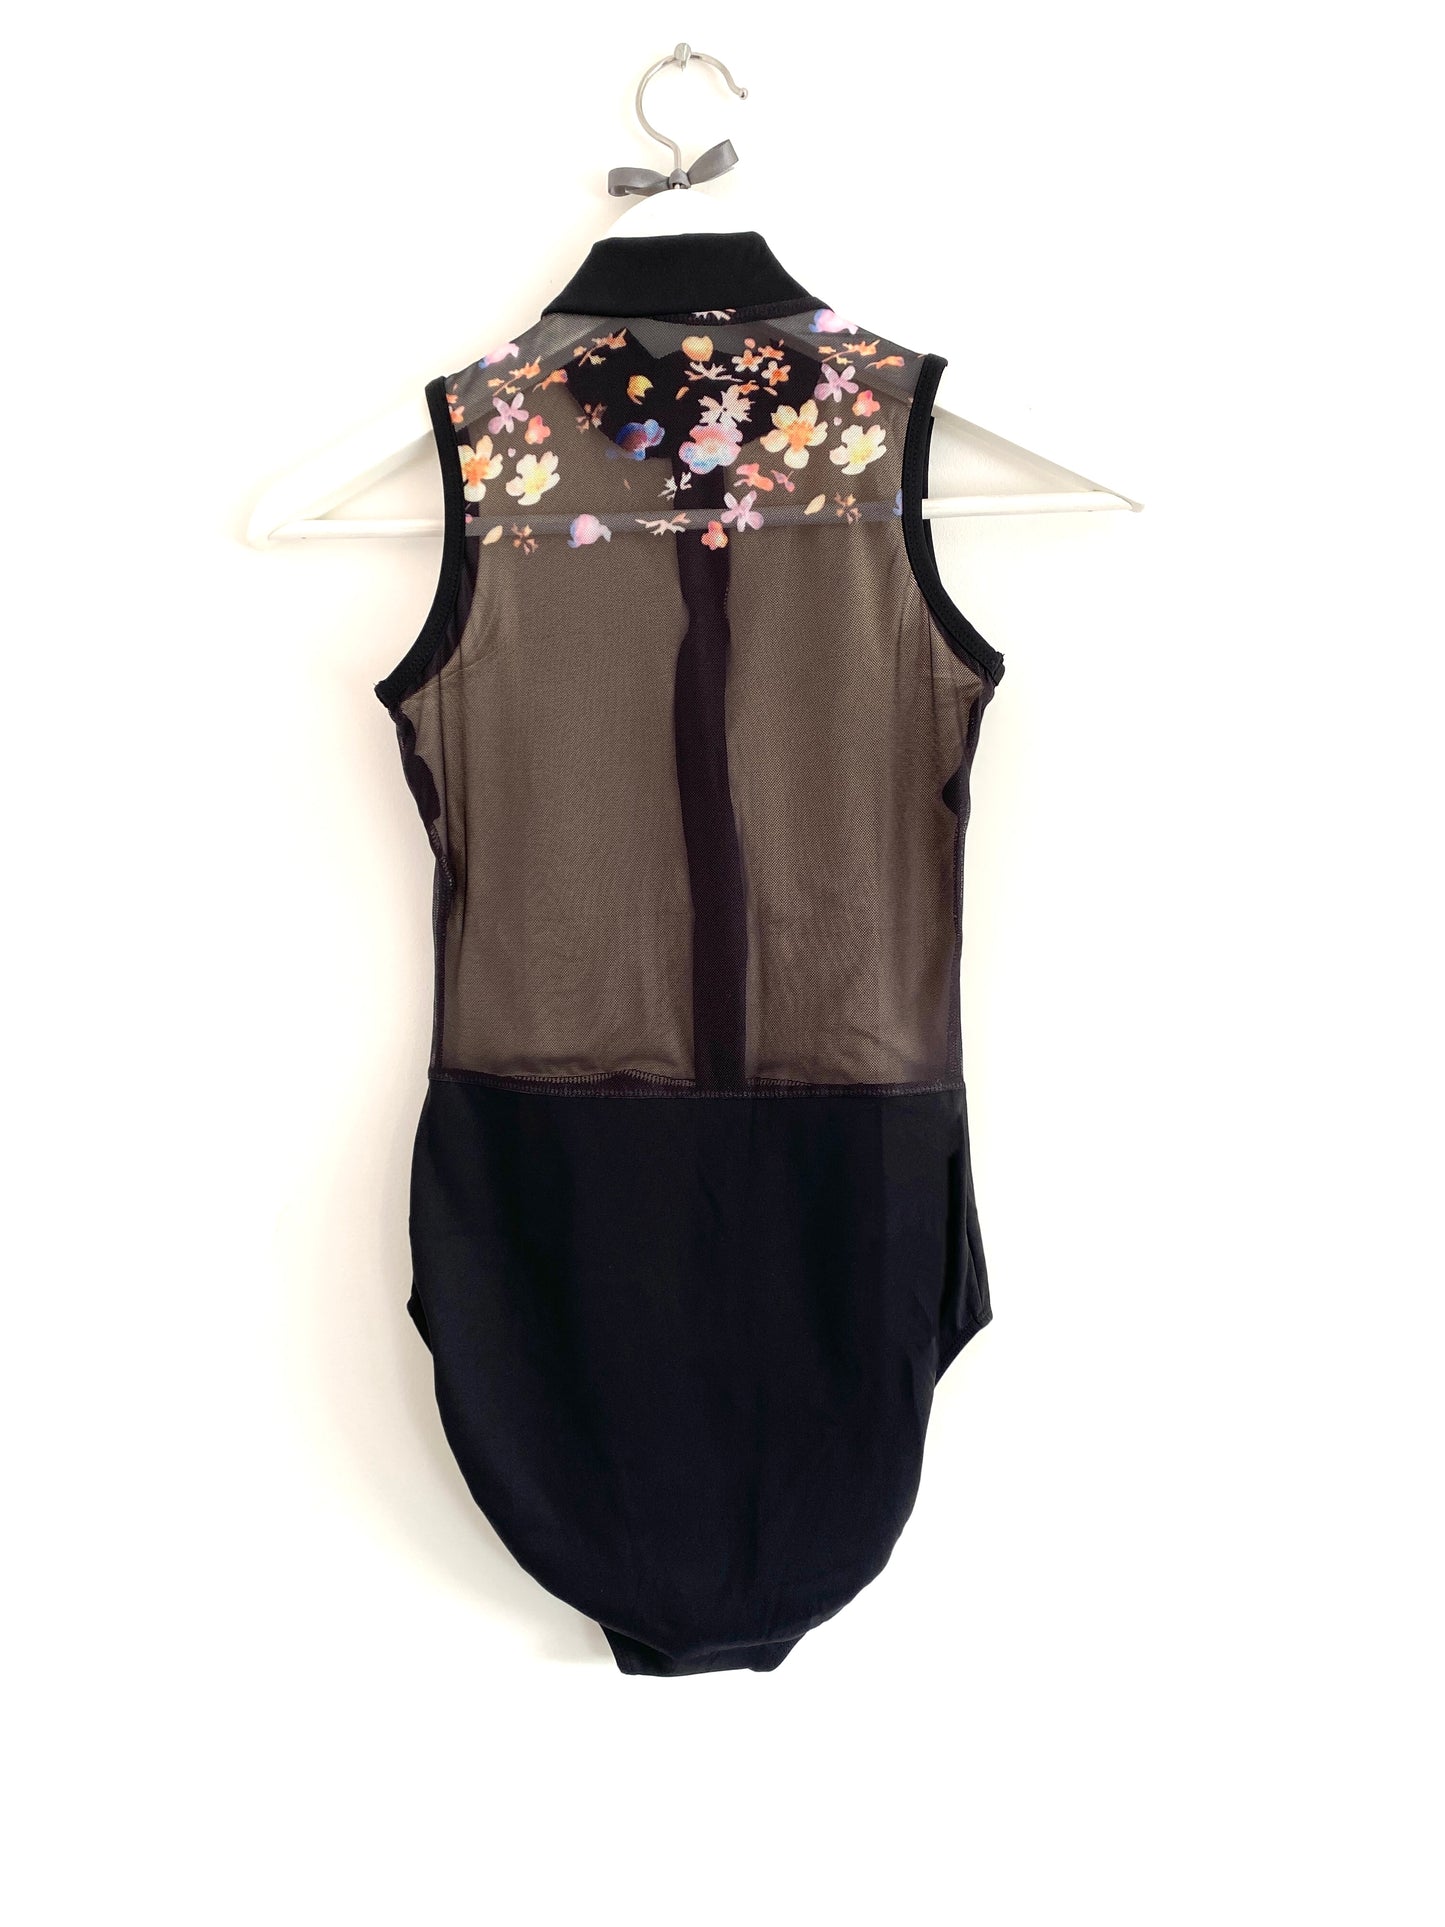 The Zip Up Leotard with Golden Flowers -Black from The Collective Dancewear